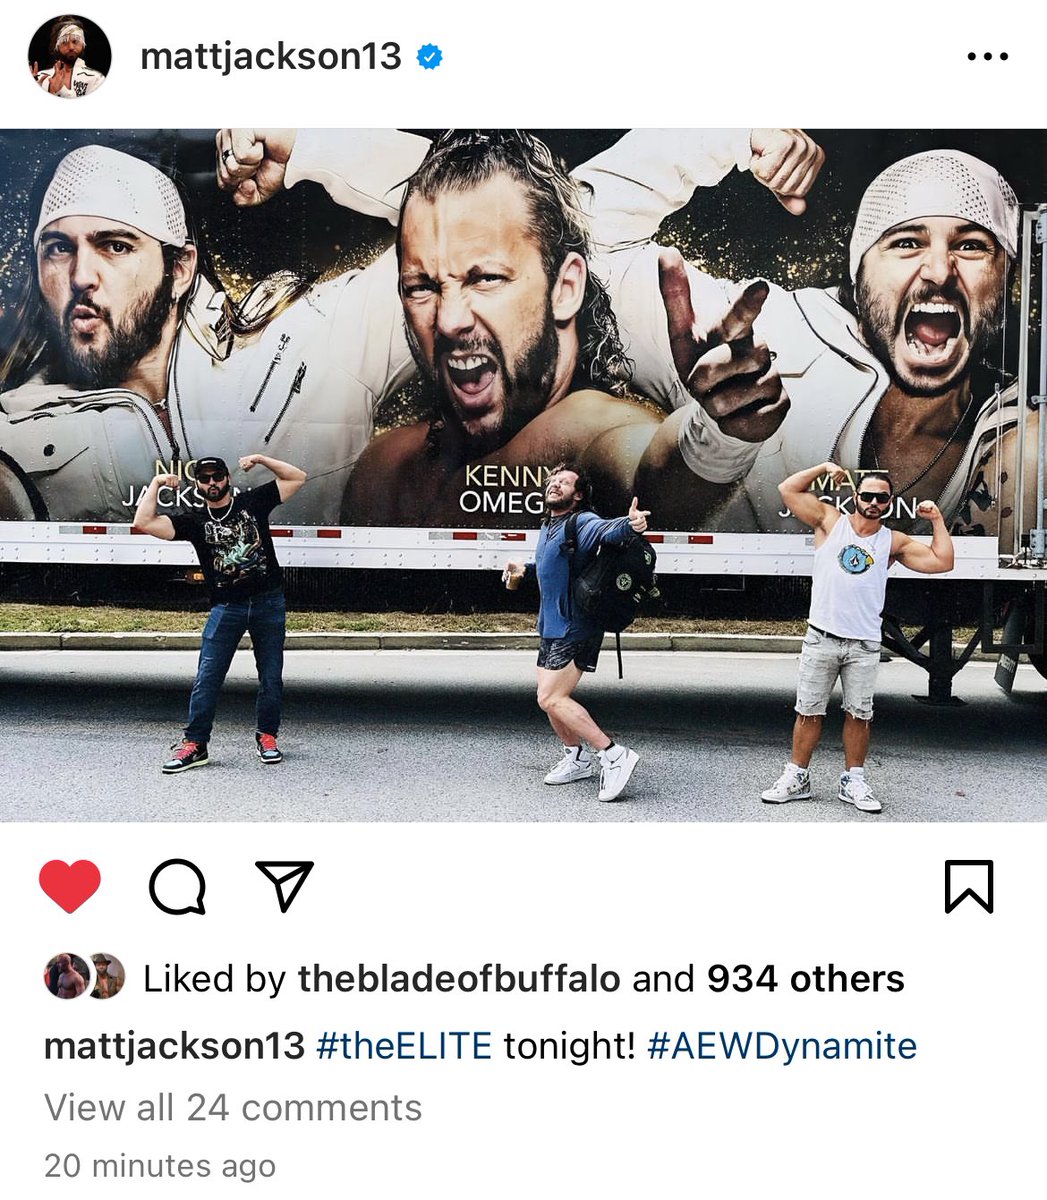 Matt Jackson, of the Young Bucks, just posted this on Instagram. Absolutely AEWsome! 😃 #AEW #TheElite #KennyOmega #TheYoungBucks